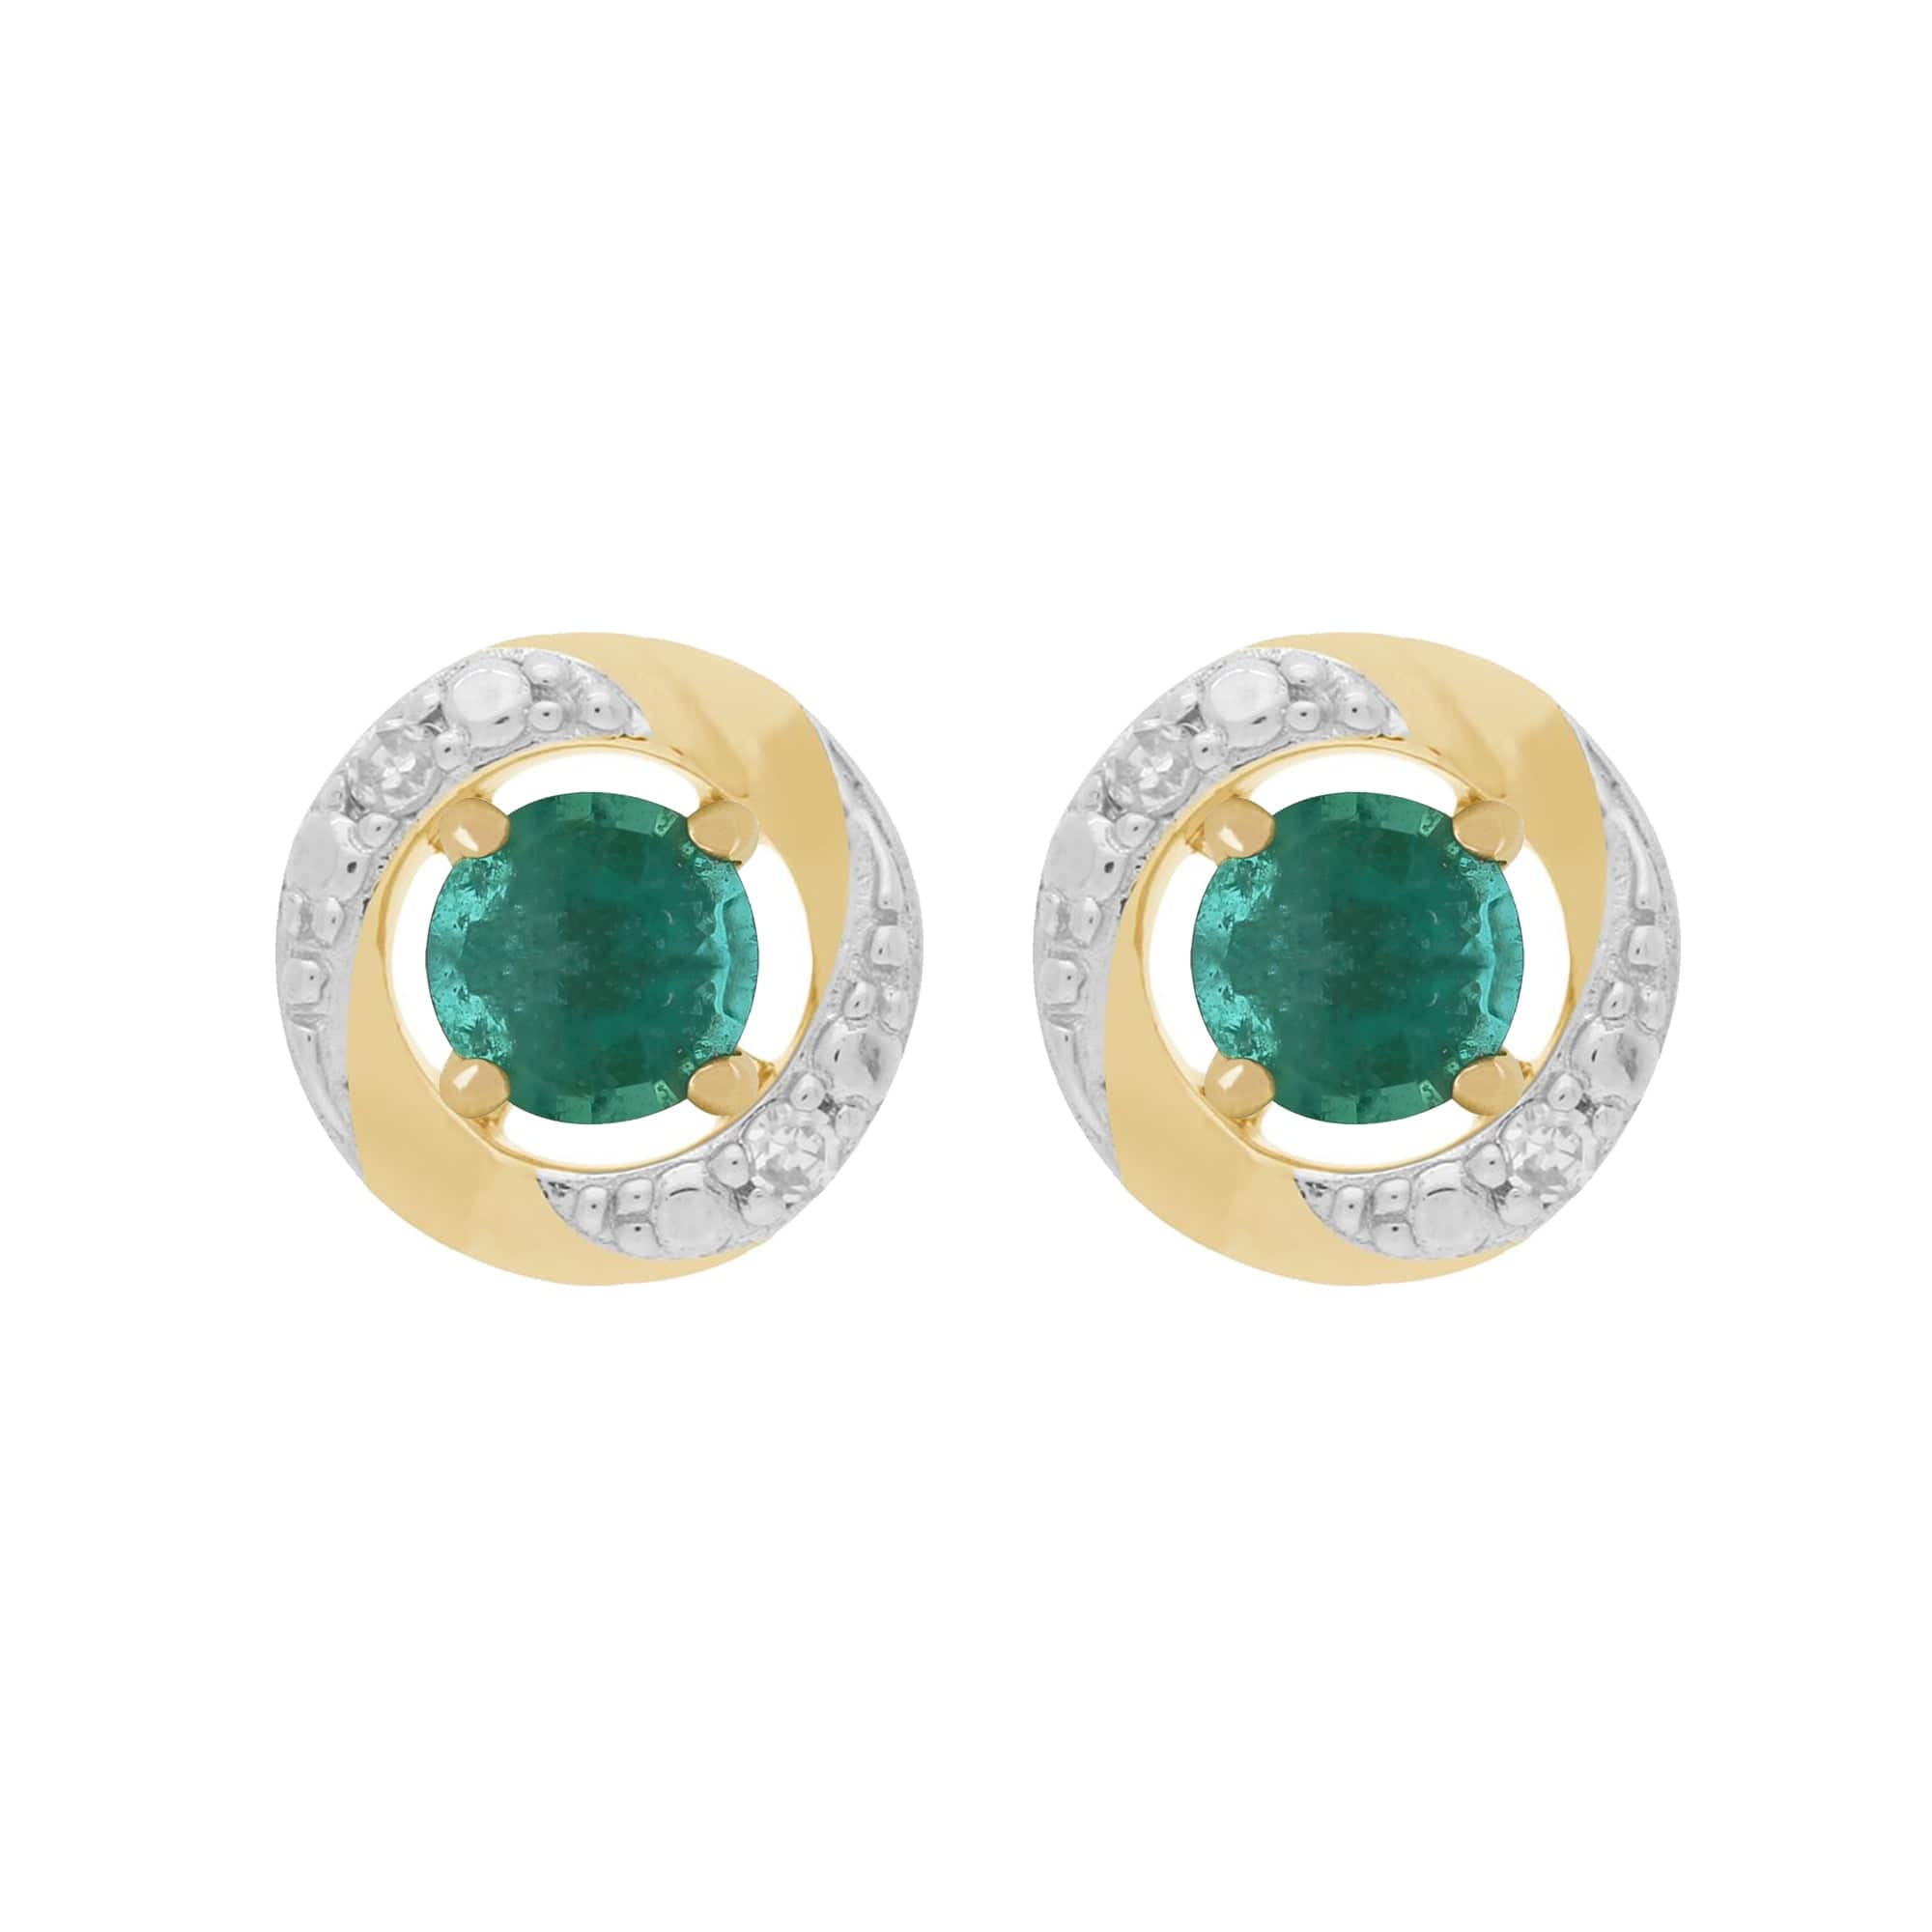 11569-191E0374019 Classic Round Emerald Stud Earrings with Detachable Diamond Halo Ear Jacket in 9ct Yellow Gold 1